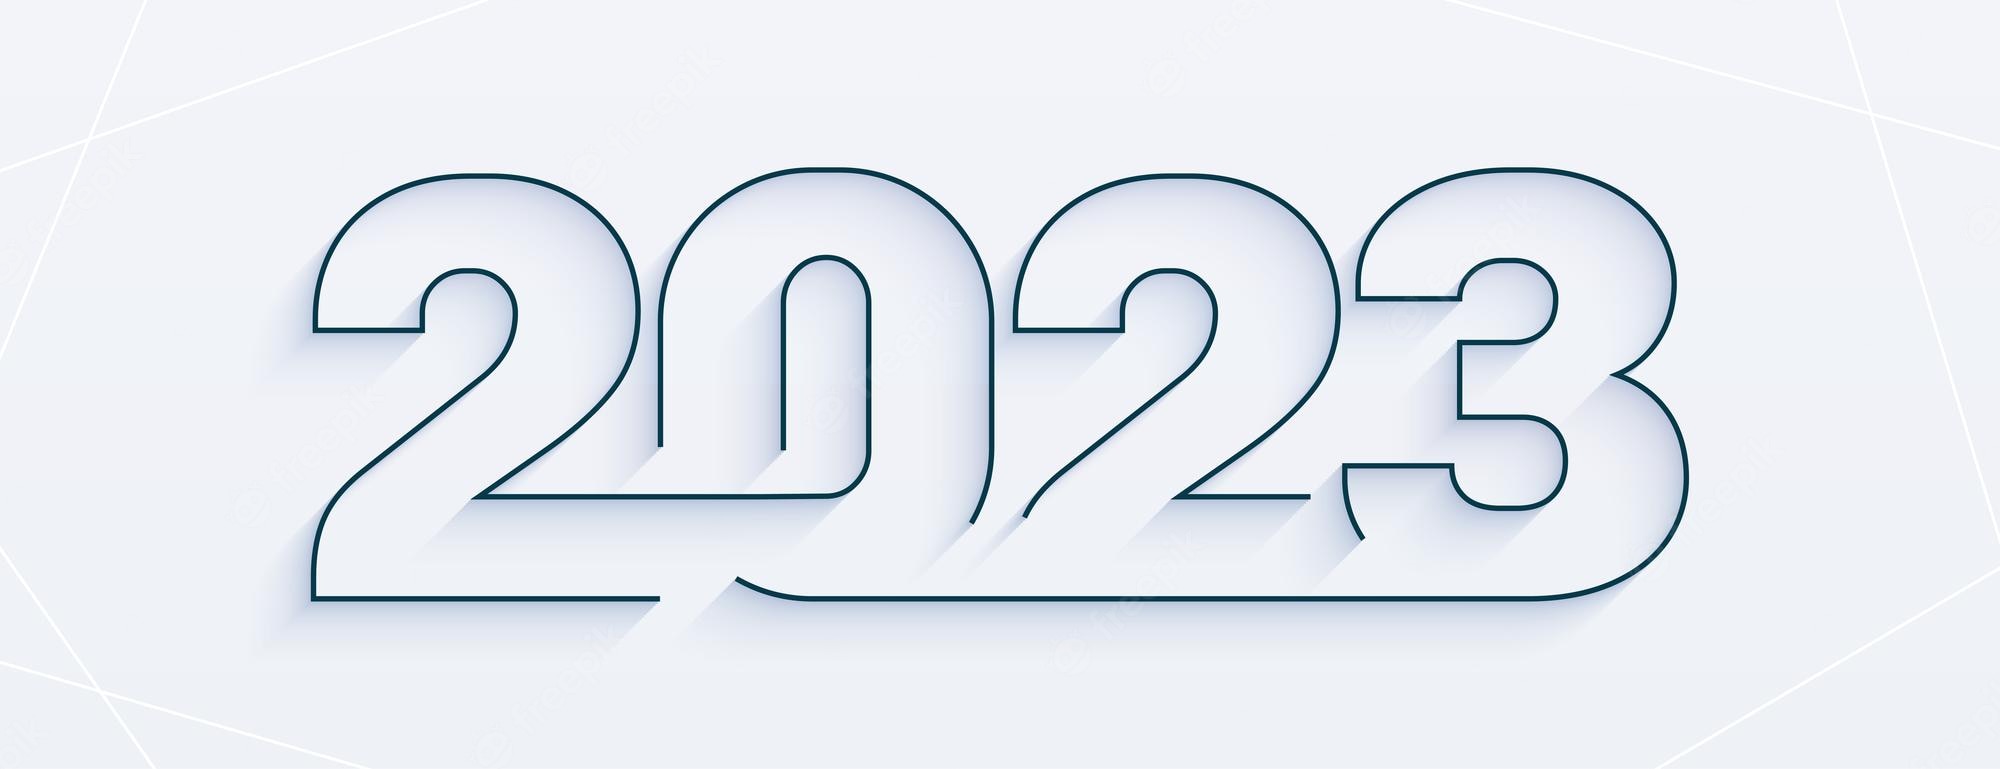 Free Vector. Clean 2023 text in line style for new year wallpaper